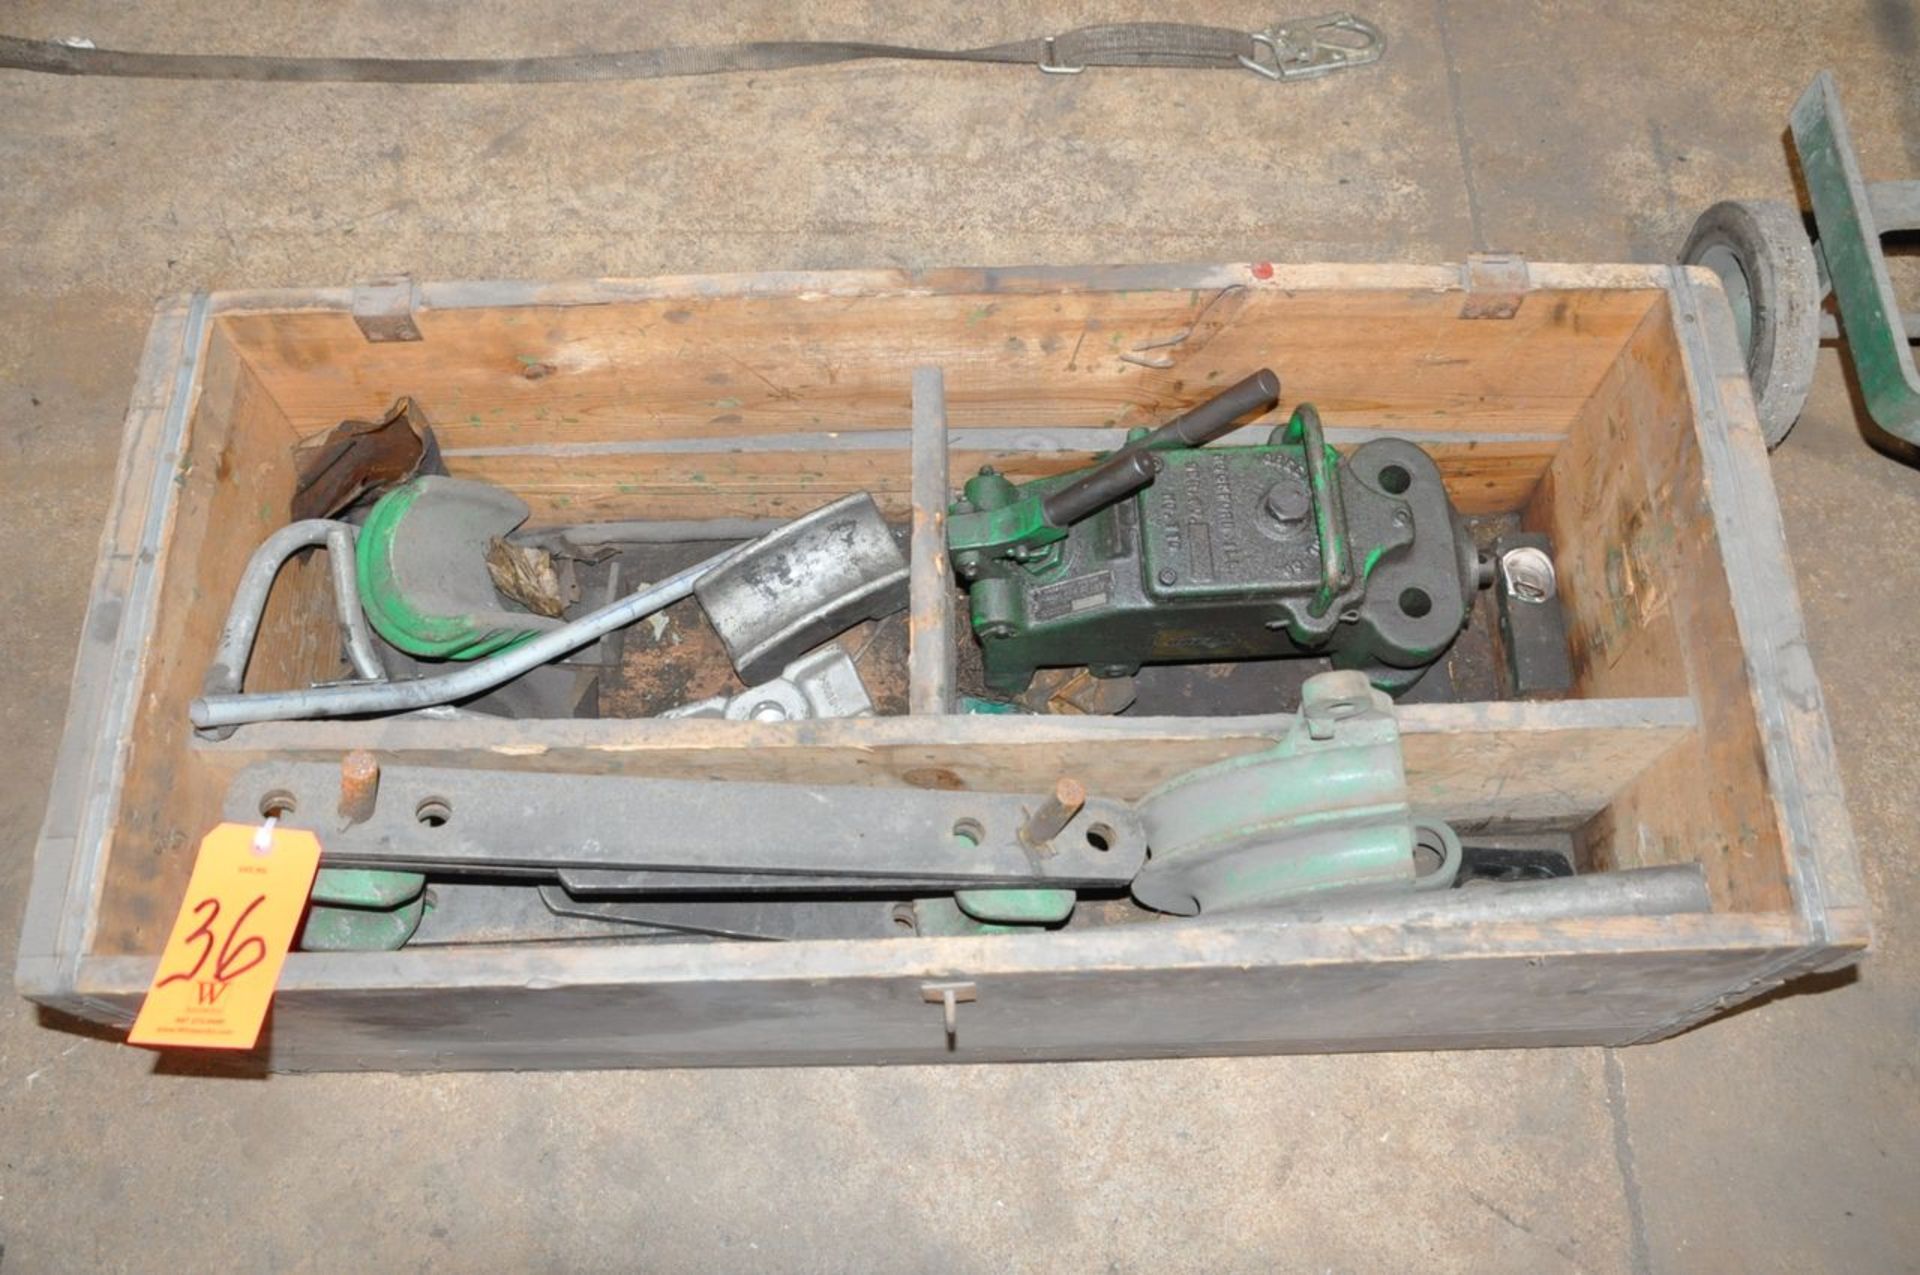 Greenlee No. 770 Hydraulic Tubing Pipe Bender in (1) Crate, (Mill Annex)